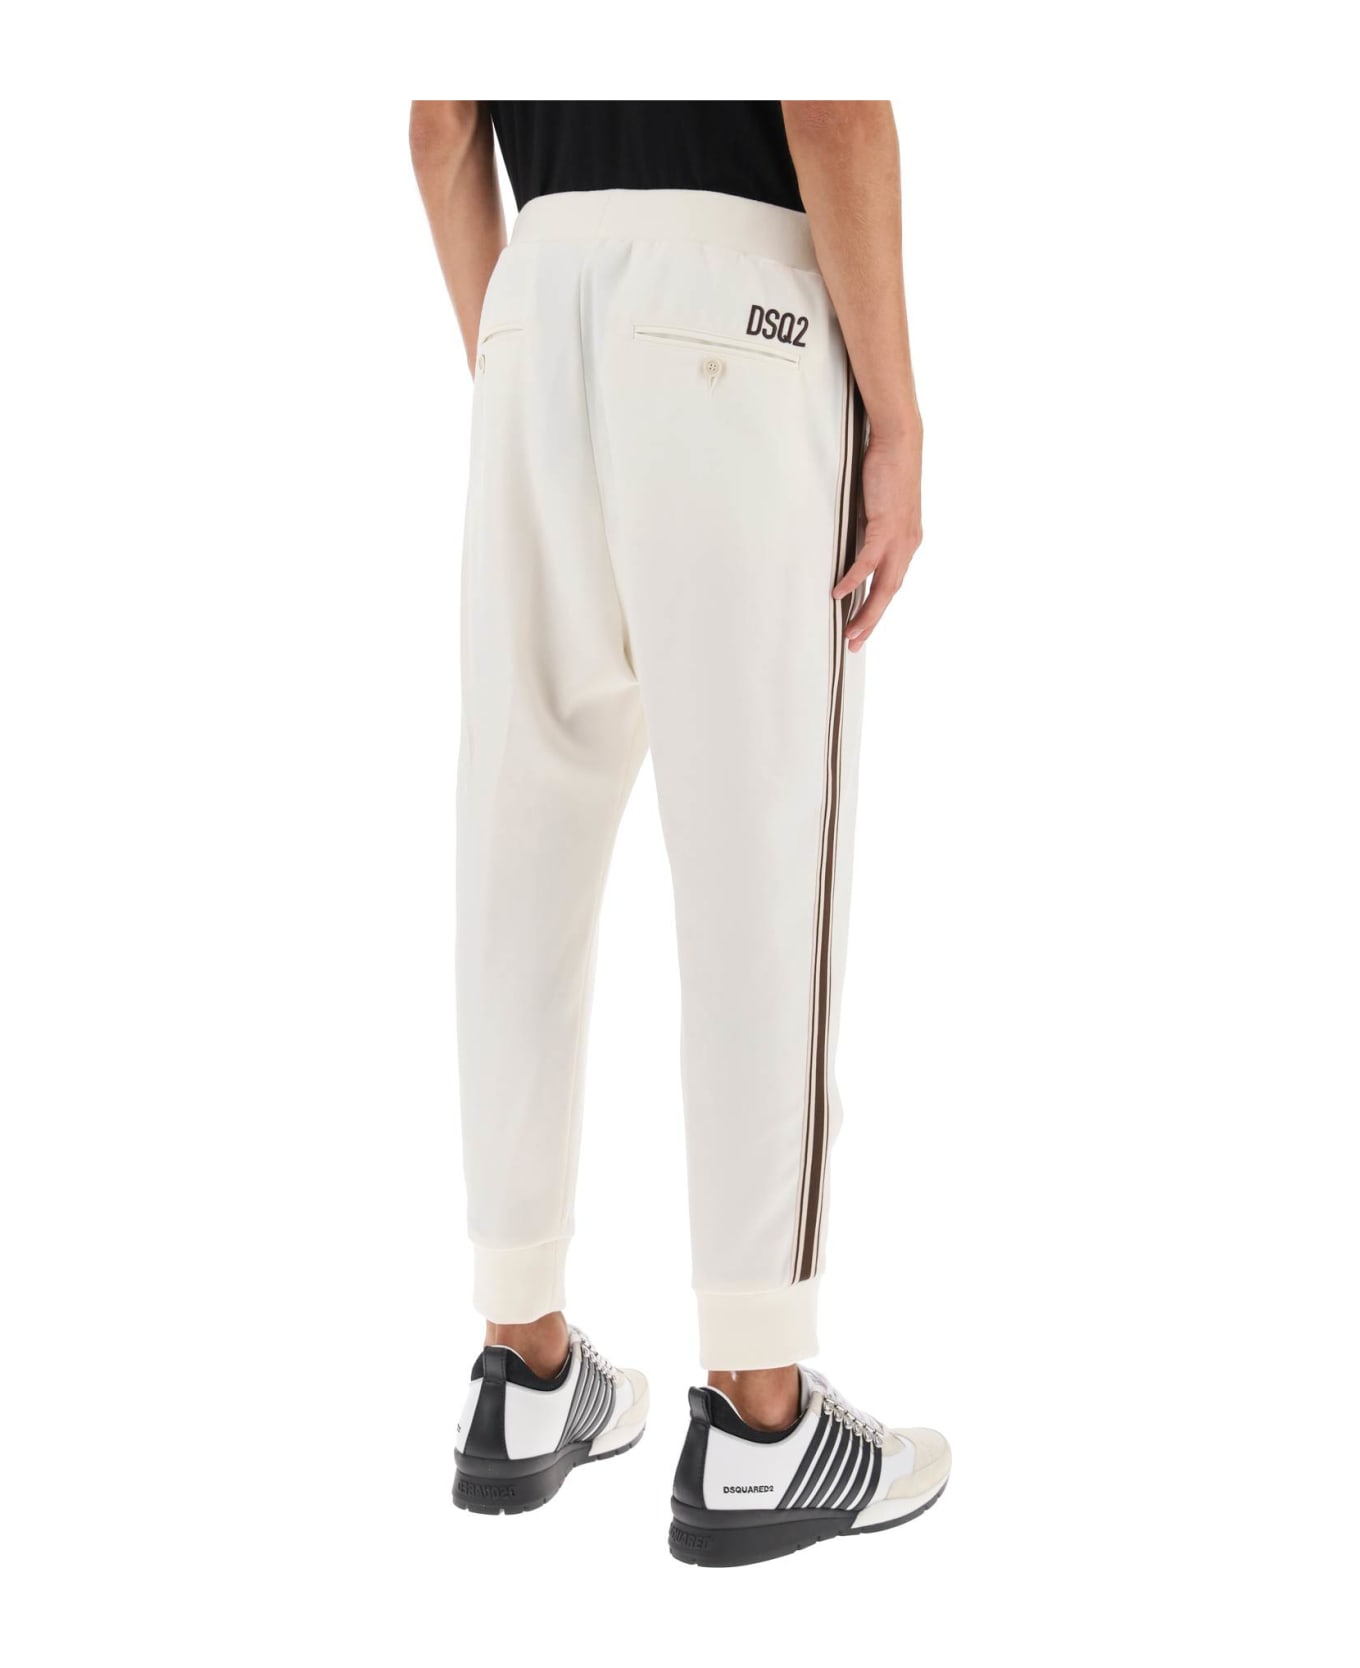 Dsquared2 Wool Blend Tailored Jog Pants - OFF WHITE (White)